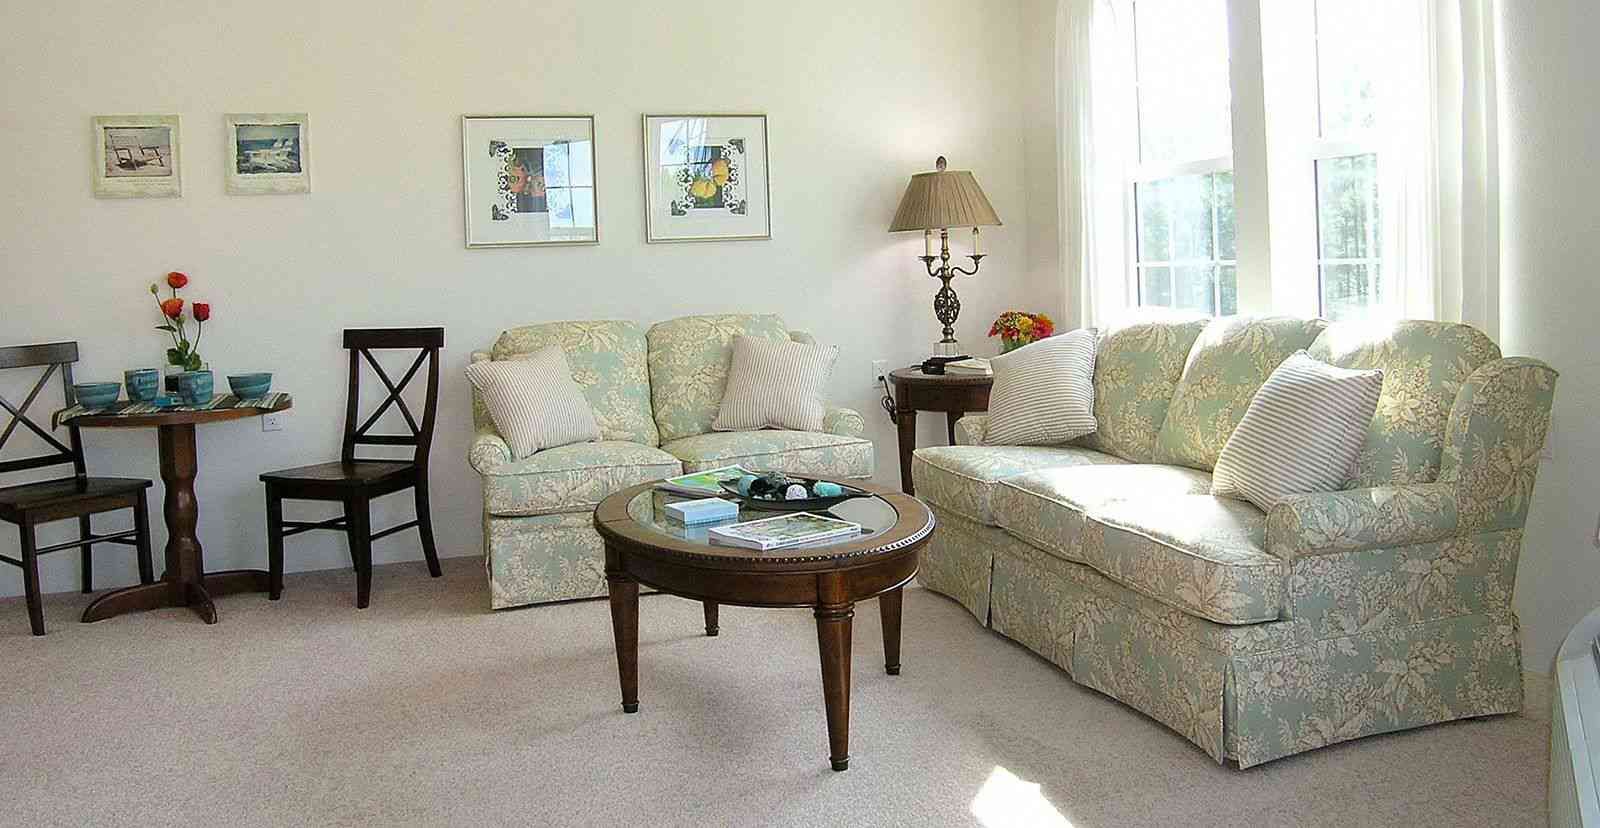 Senior living community room at Las Palmas featuring cozy furniture, home decor, and architecture.